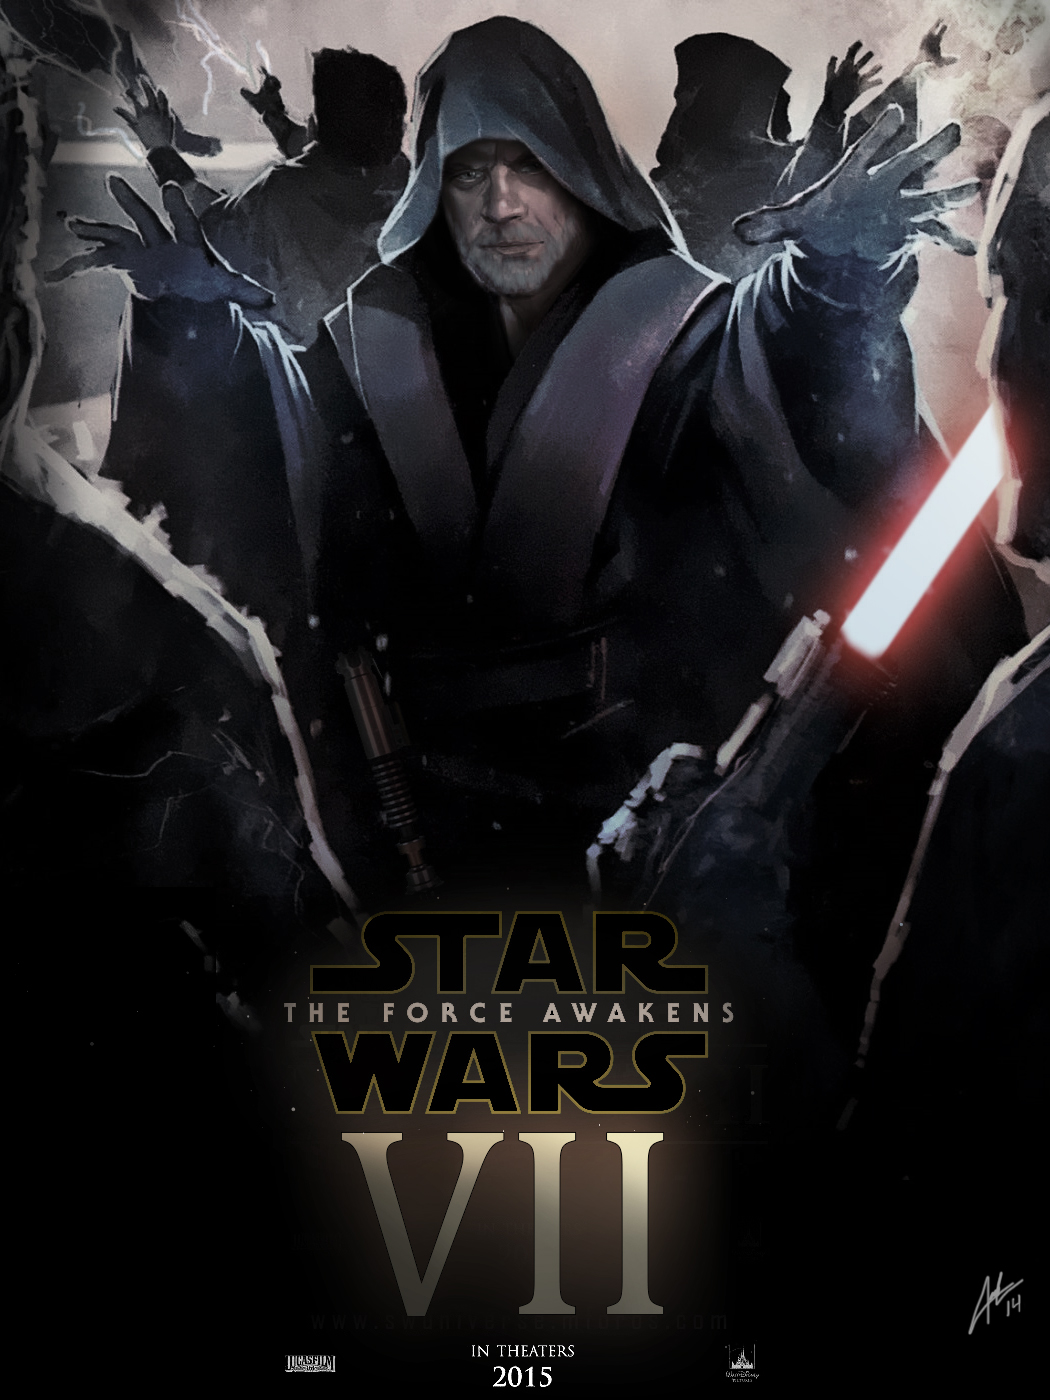 Episode VII The Force Awakens Poster by DarthTemoc